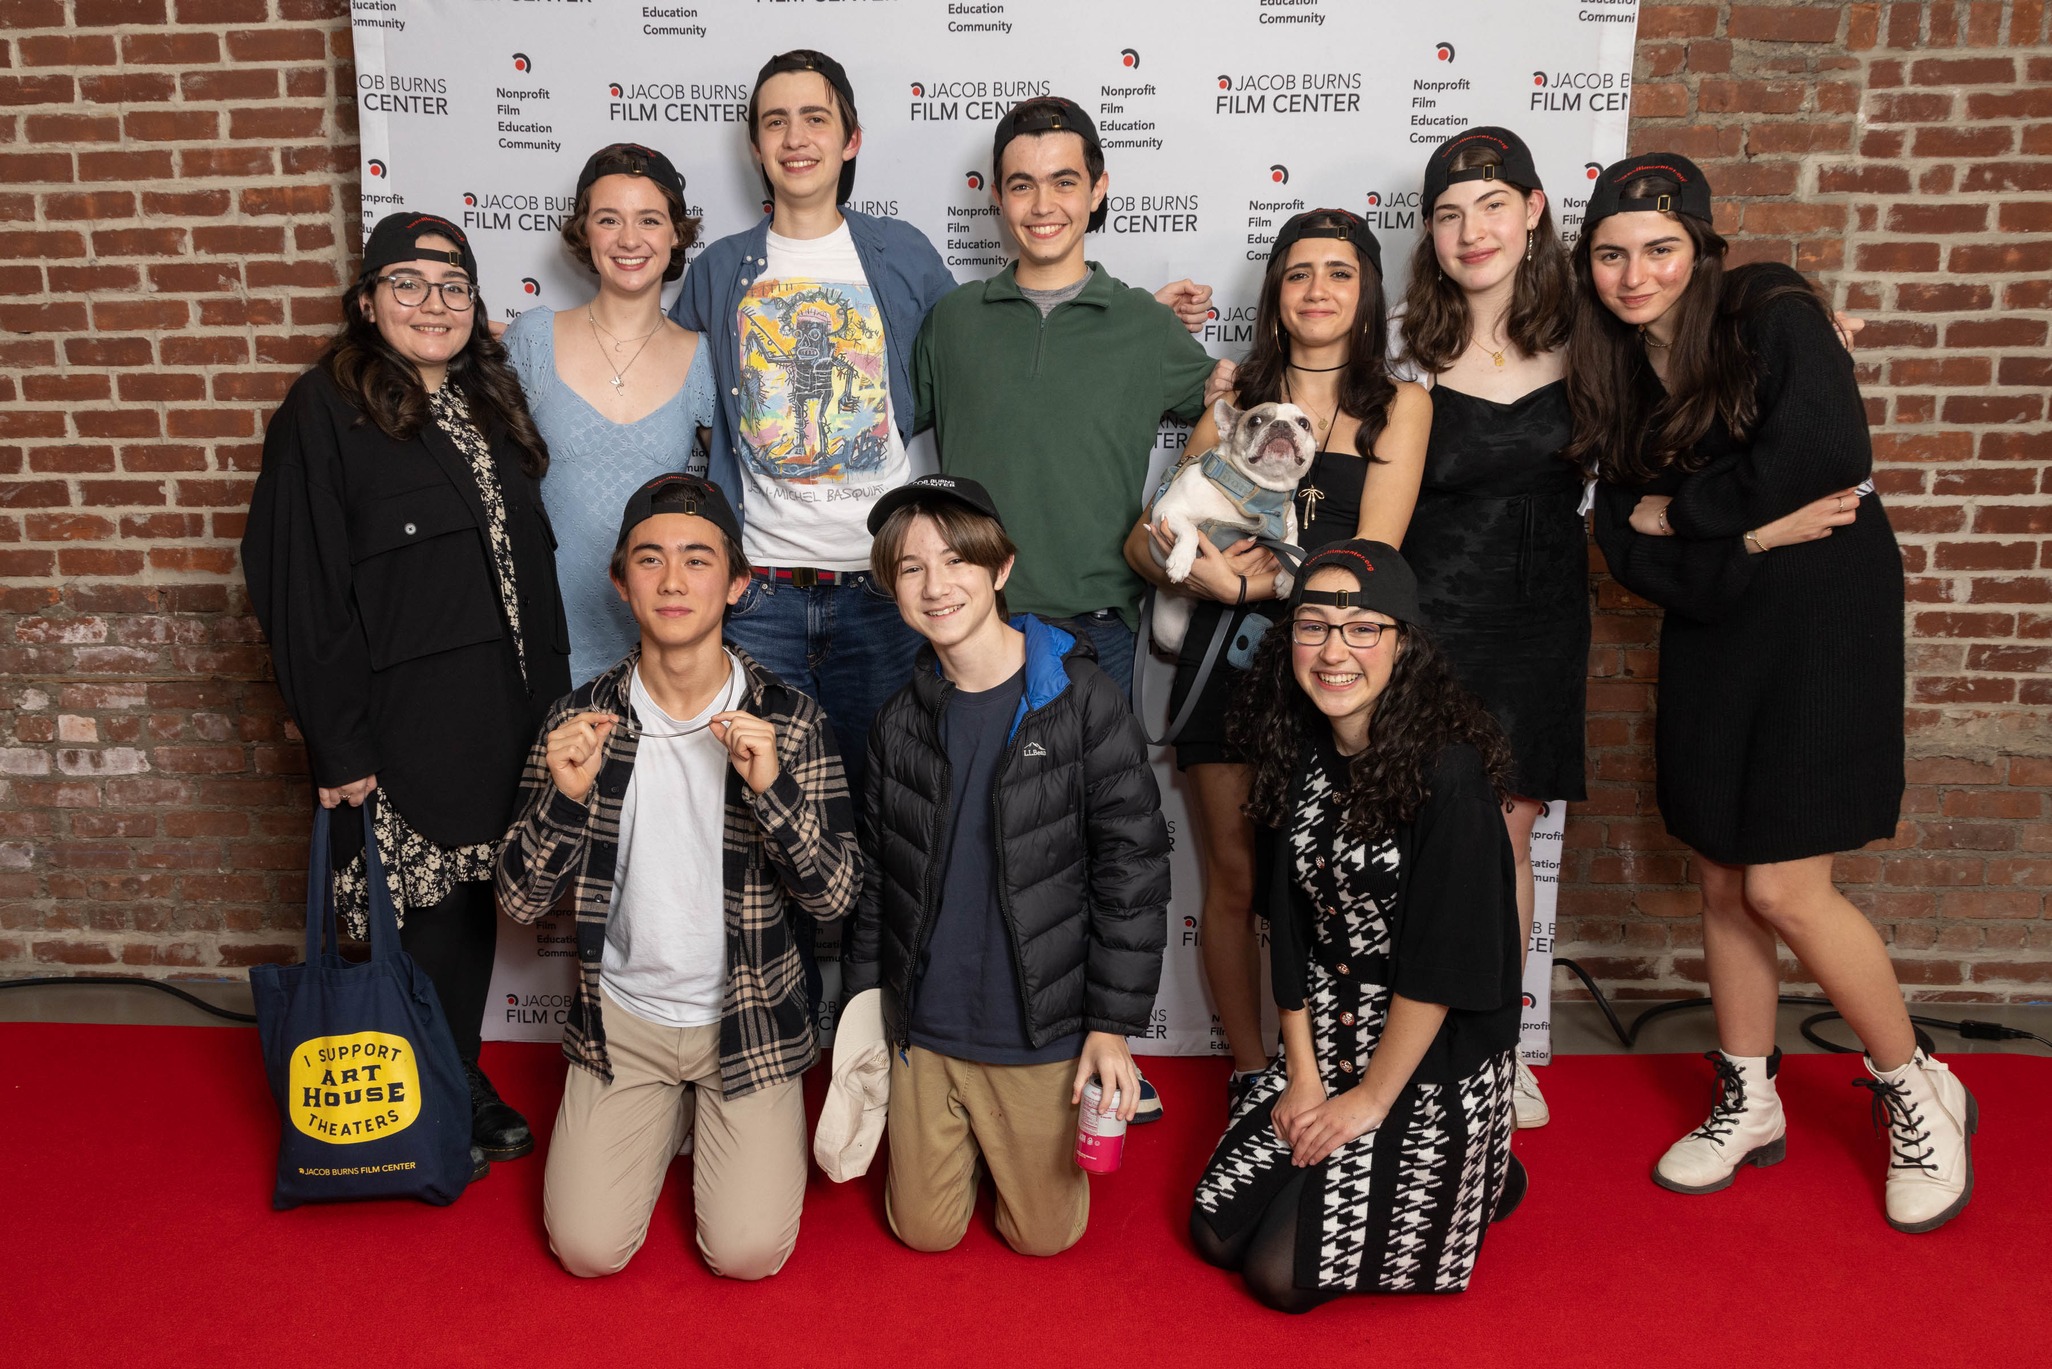 Highlights from the Inaugural Cohort of the JBFC Emerging Screenwriter Fellowship with NYU Tisch